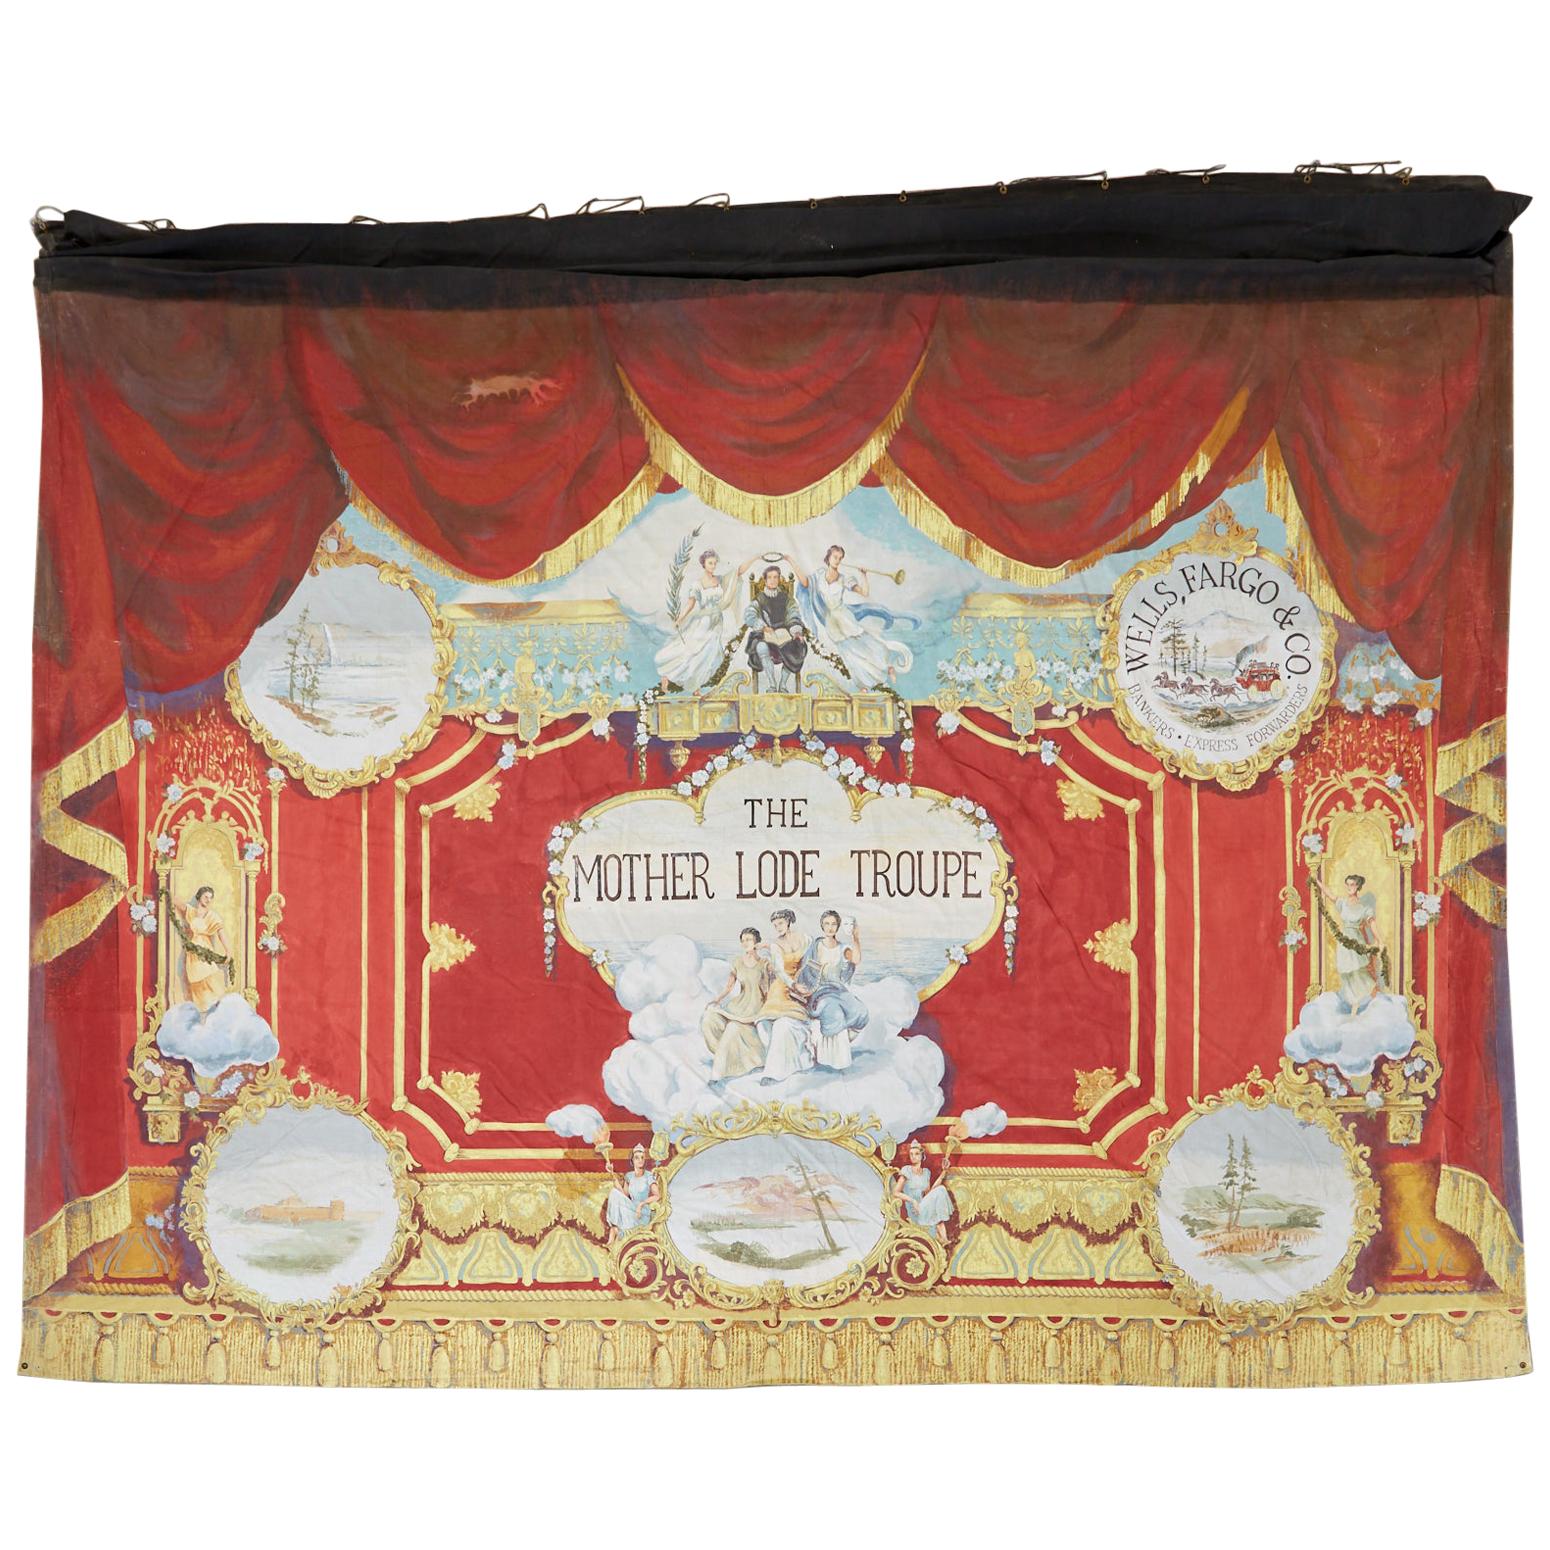 California Gold Rush Painted Stage Curtain after Charles Nahl